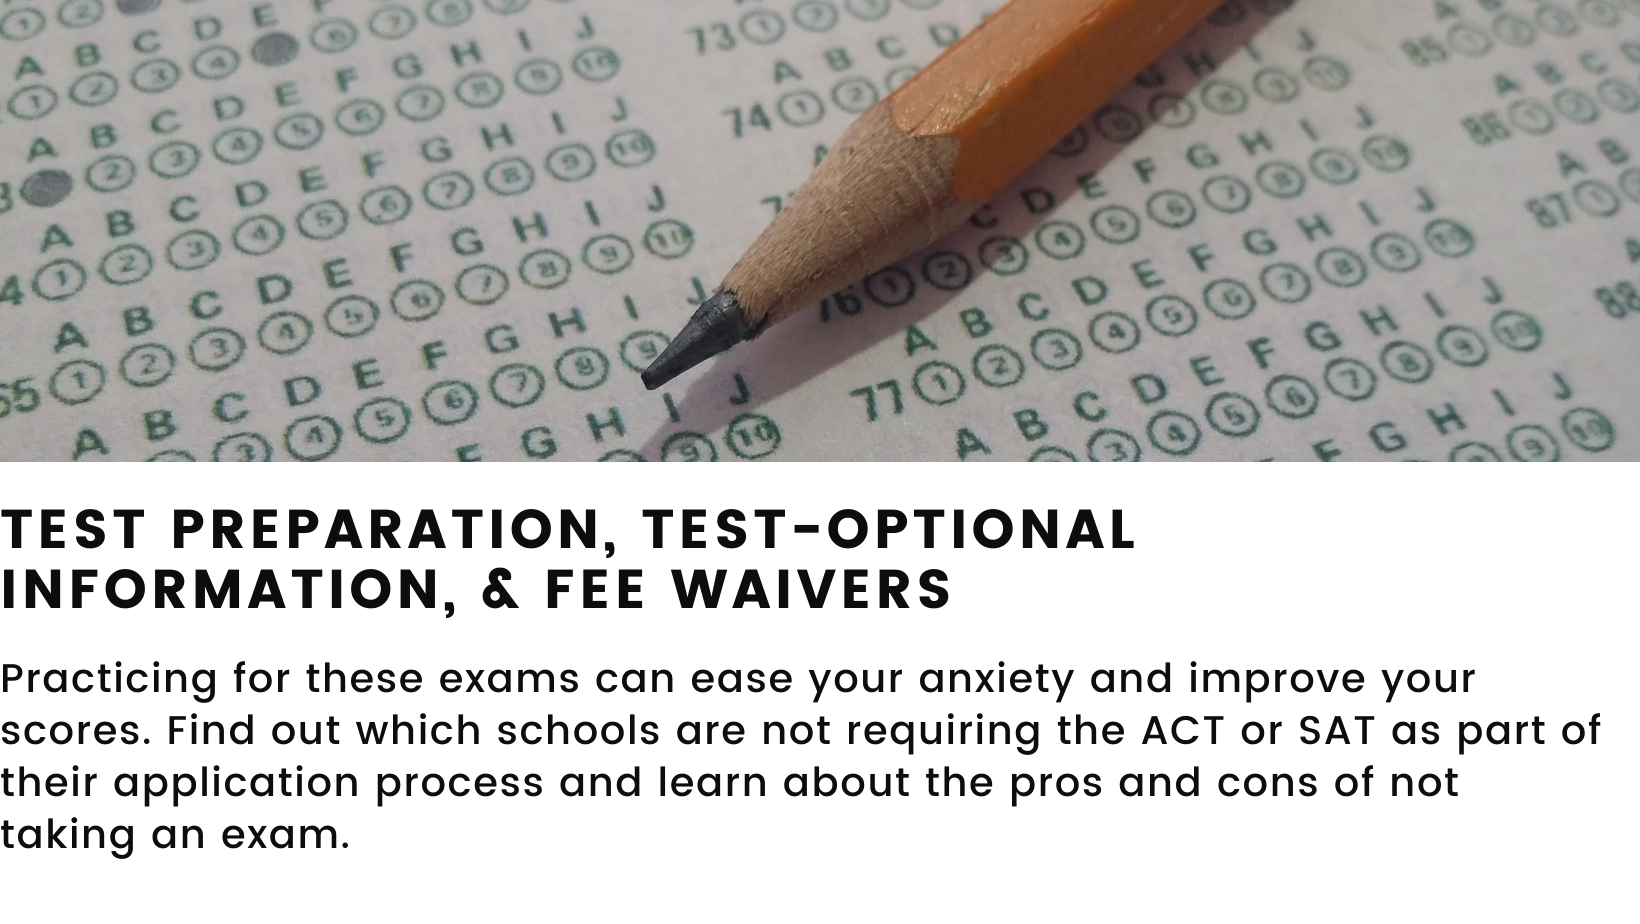 Decorative element featuring a multiple choice test form.  The heading reads: Test preparation, test-optional Information, & Fee Waivers. The body below reads: Practicing for these exams can ease your anxiety and improve your scores. Find out which schools are not requiring the ACT or SAT as part of their application process and learn about the pros and cons of not taking an exam. 